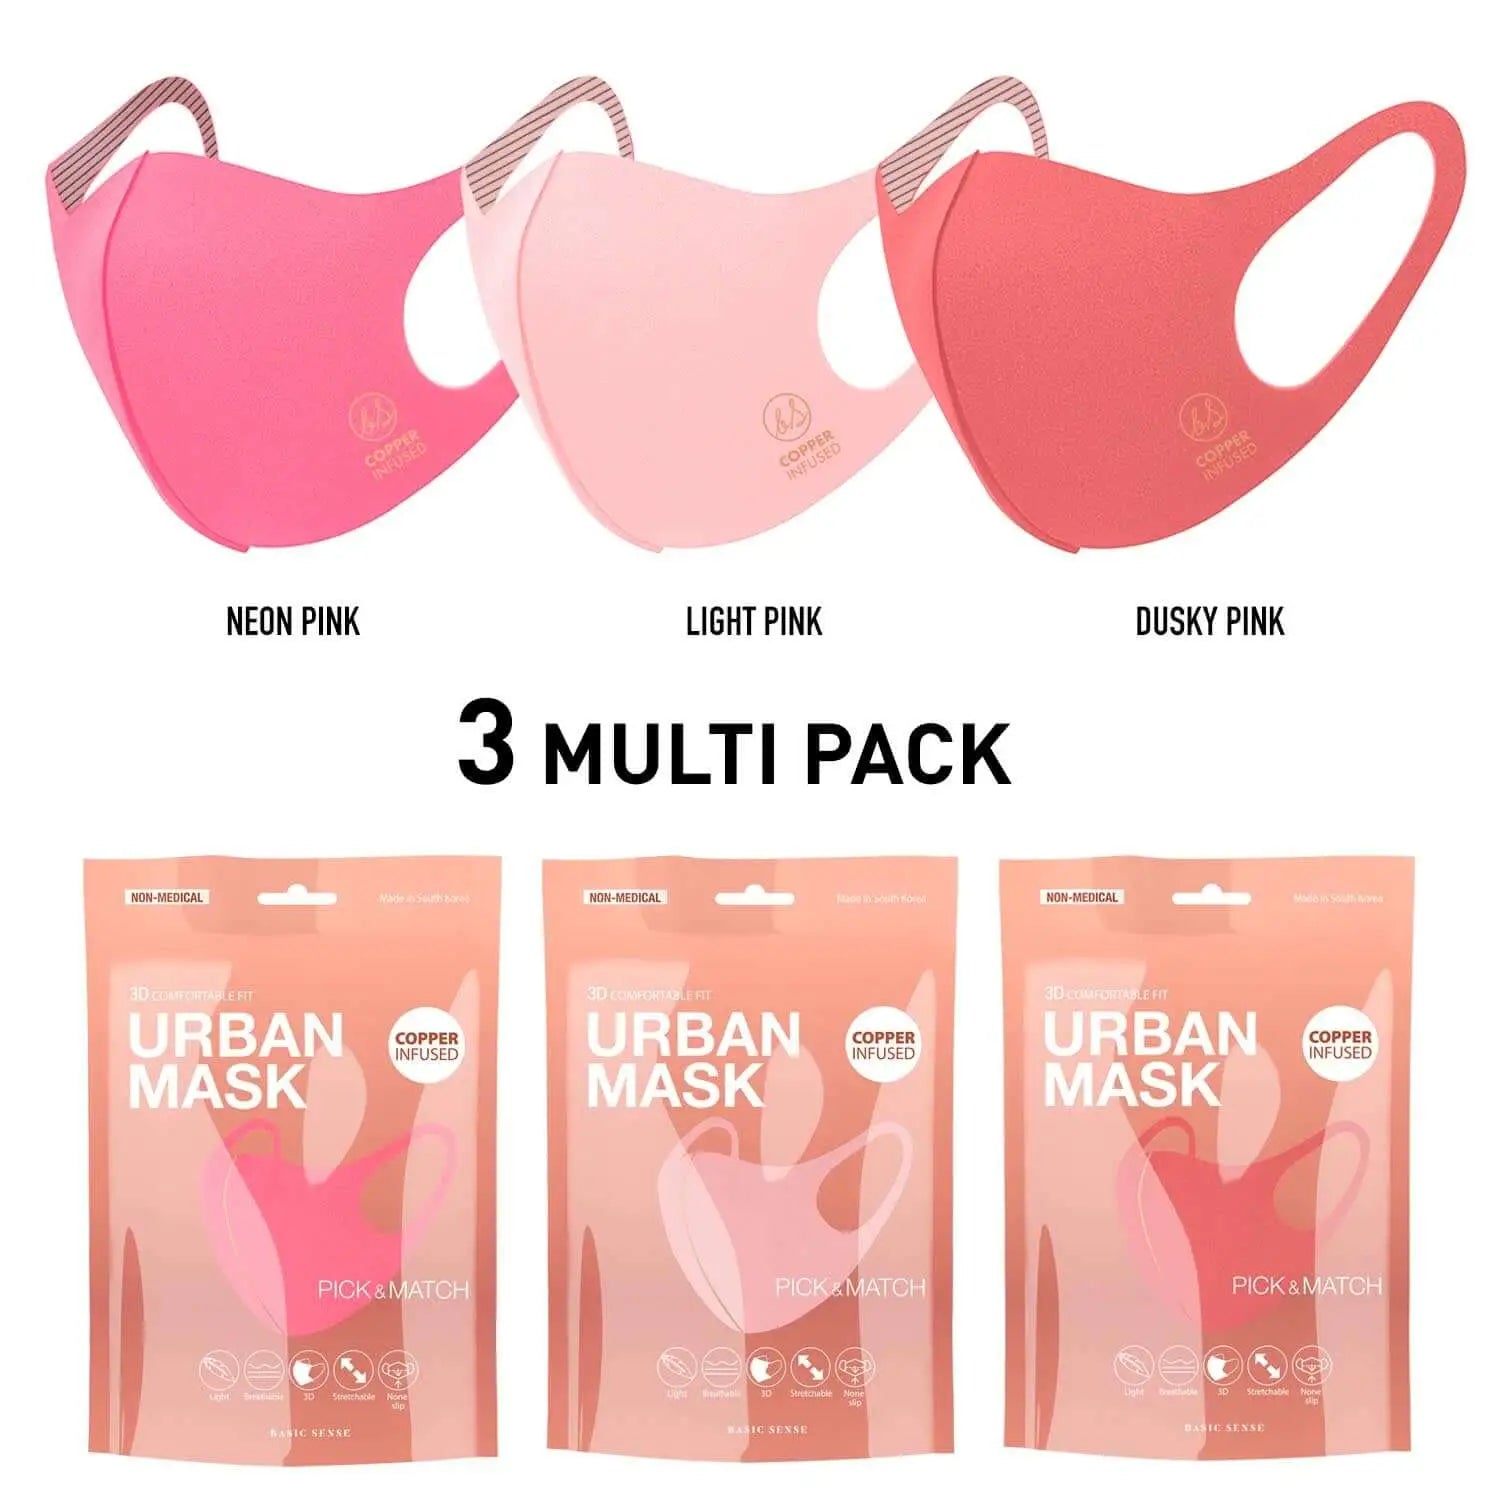 3 pack of copper infused face masks in pink color variations for stylish protection.